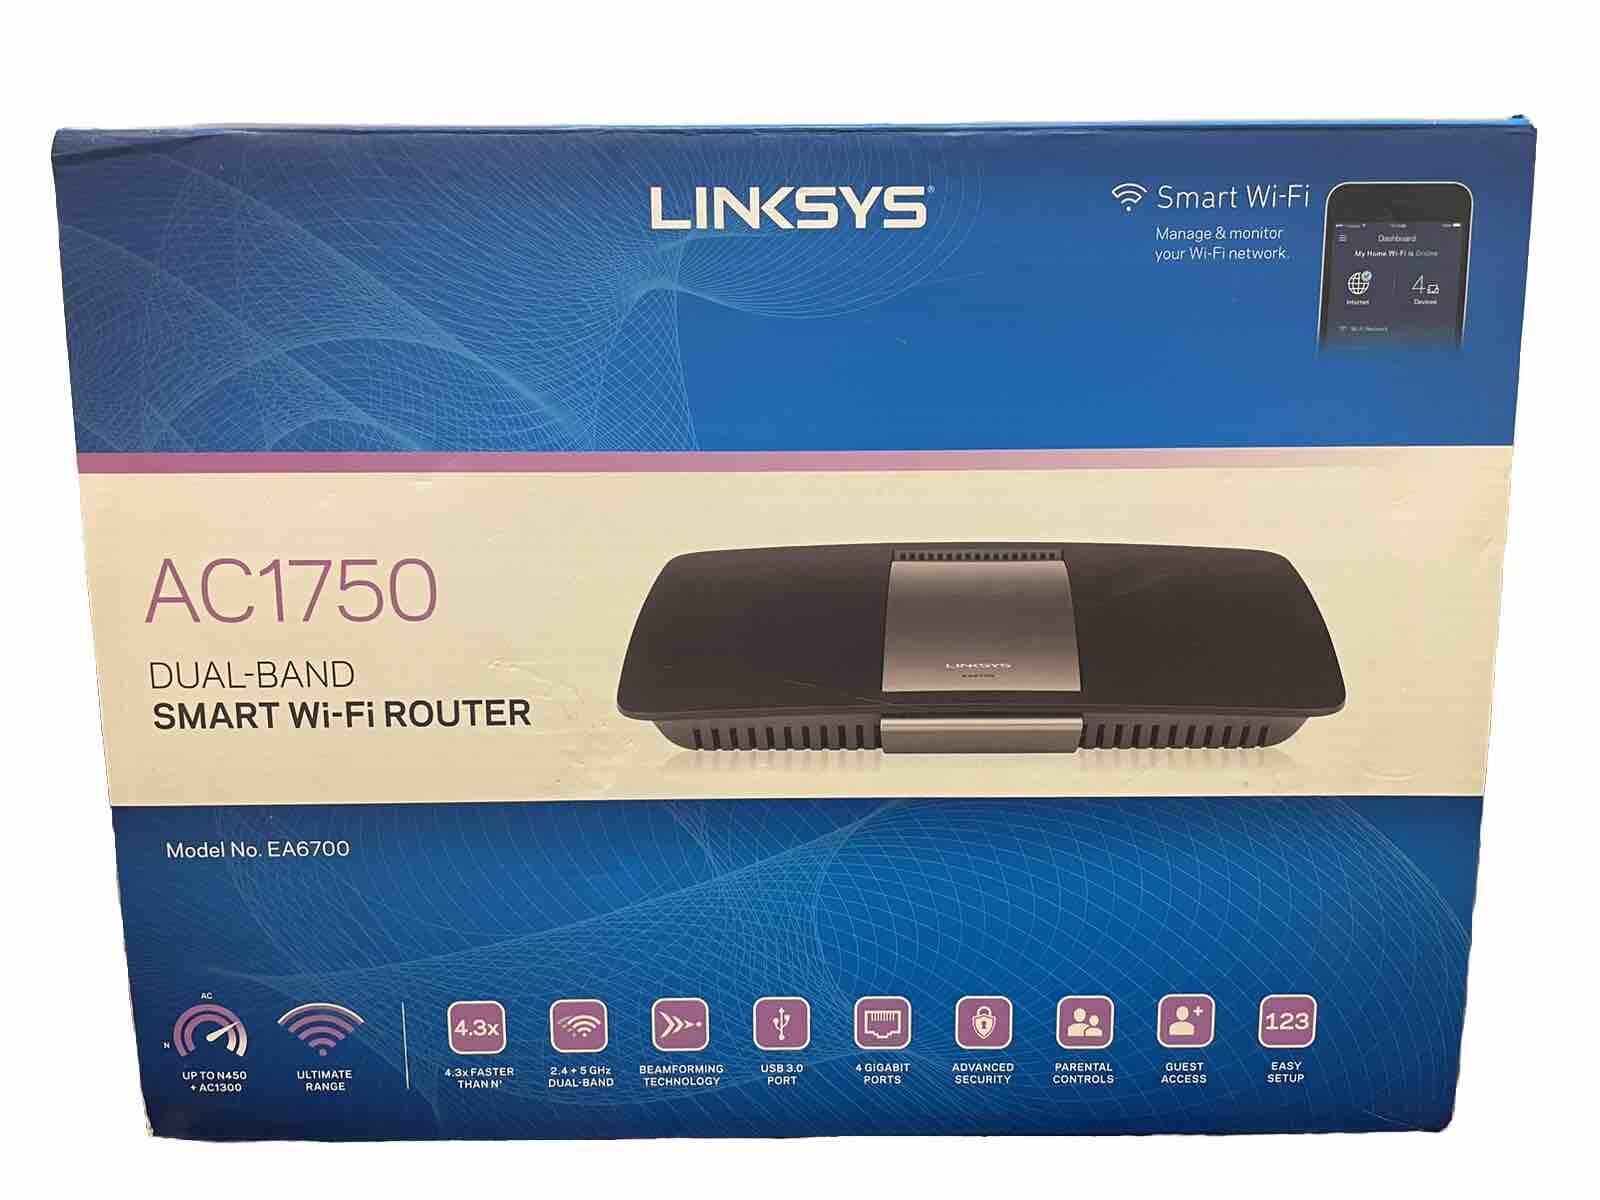 Linksys AC1750 Dual-Band Smart Wi-Fi Router Model No. EA6700